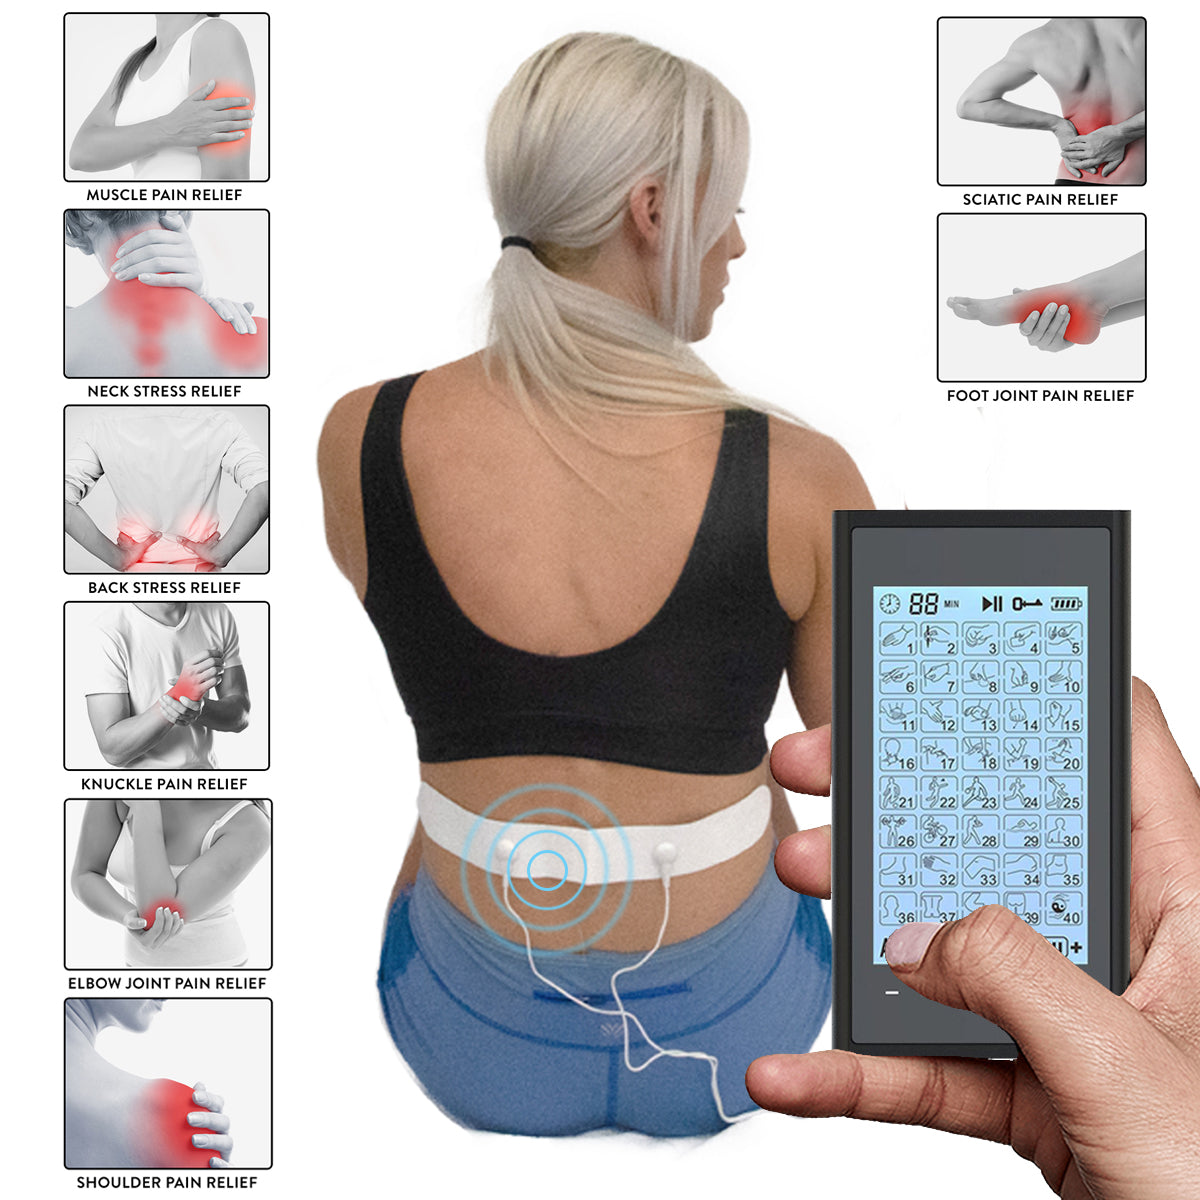 New Version 40 Modes T40AB2 TENS unit & Muscle Stimulator - 2 Year Warranty